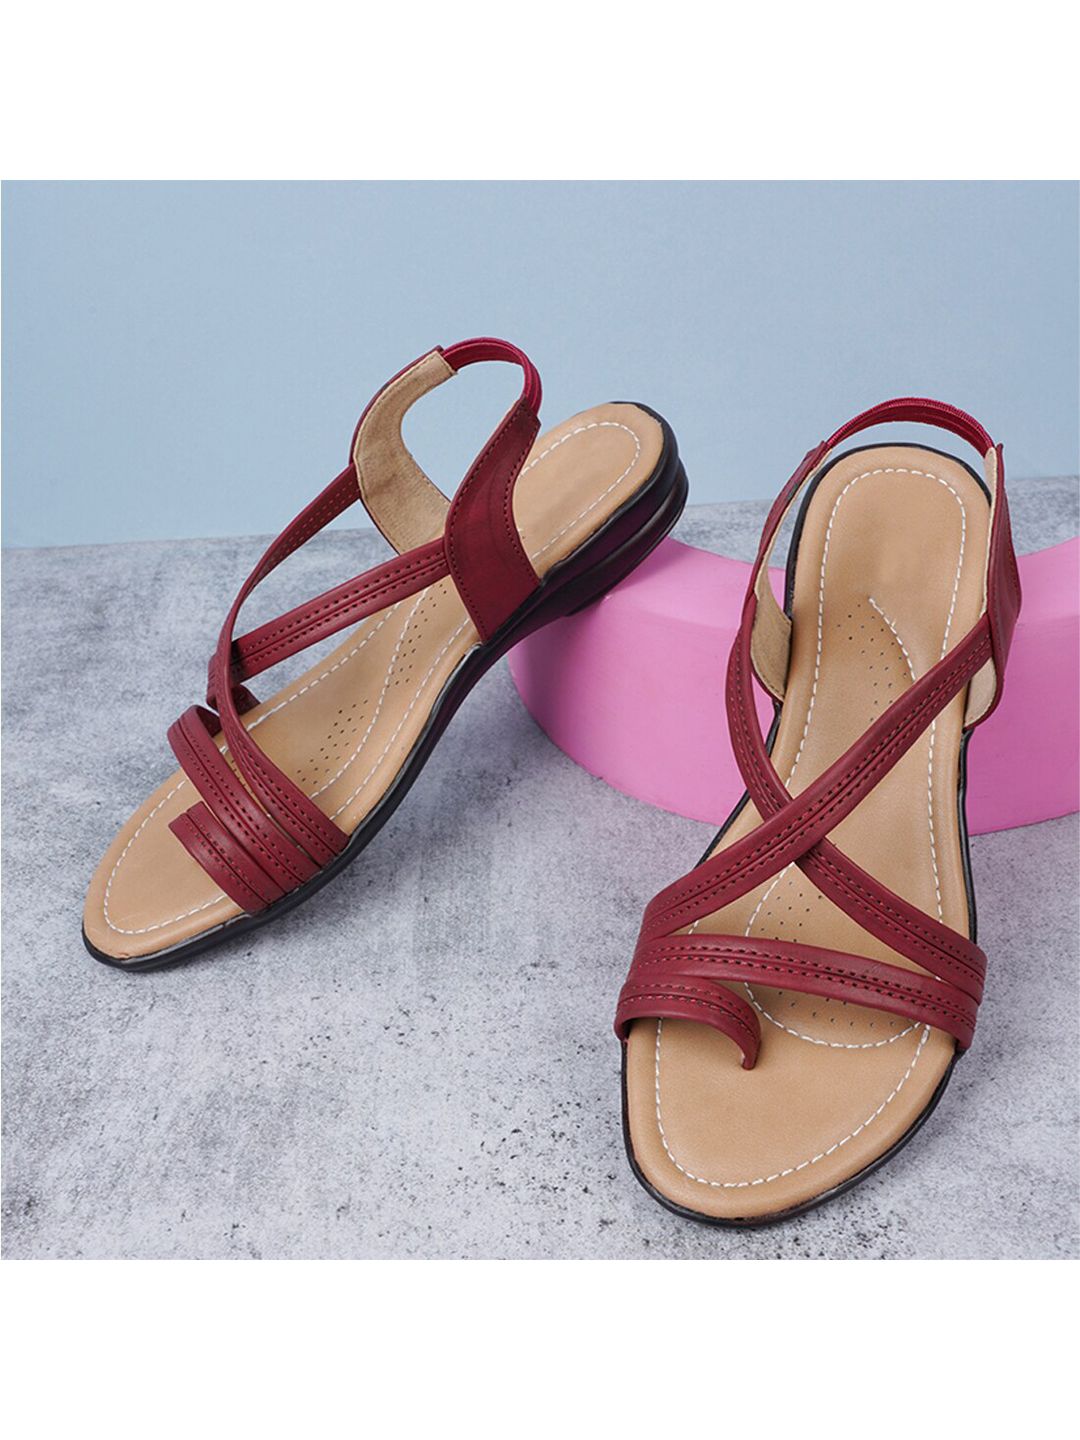 Style Shoes Women Maroon Open Toe Flat Sandals Price in India